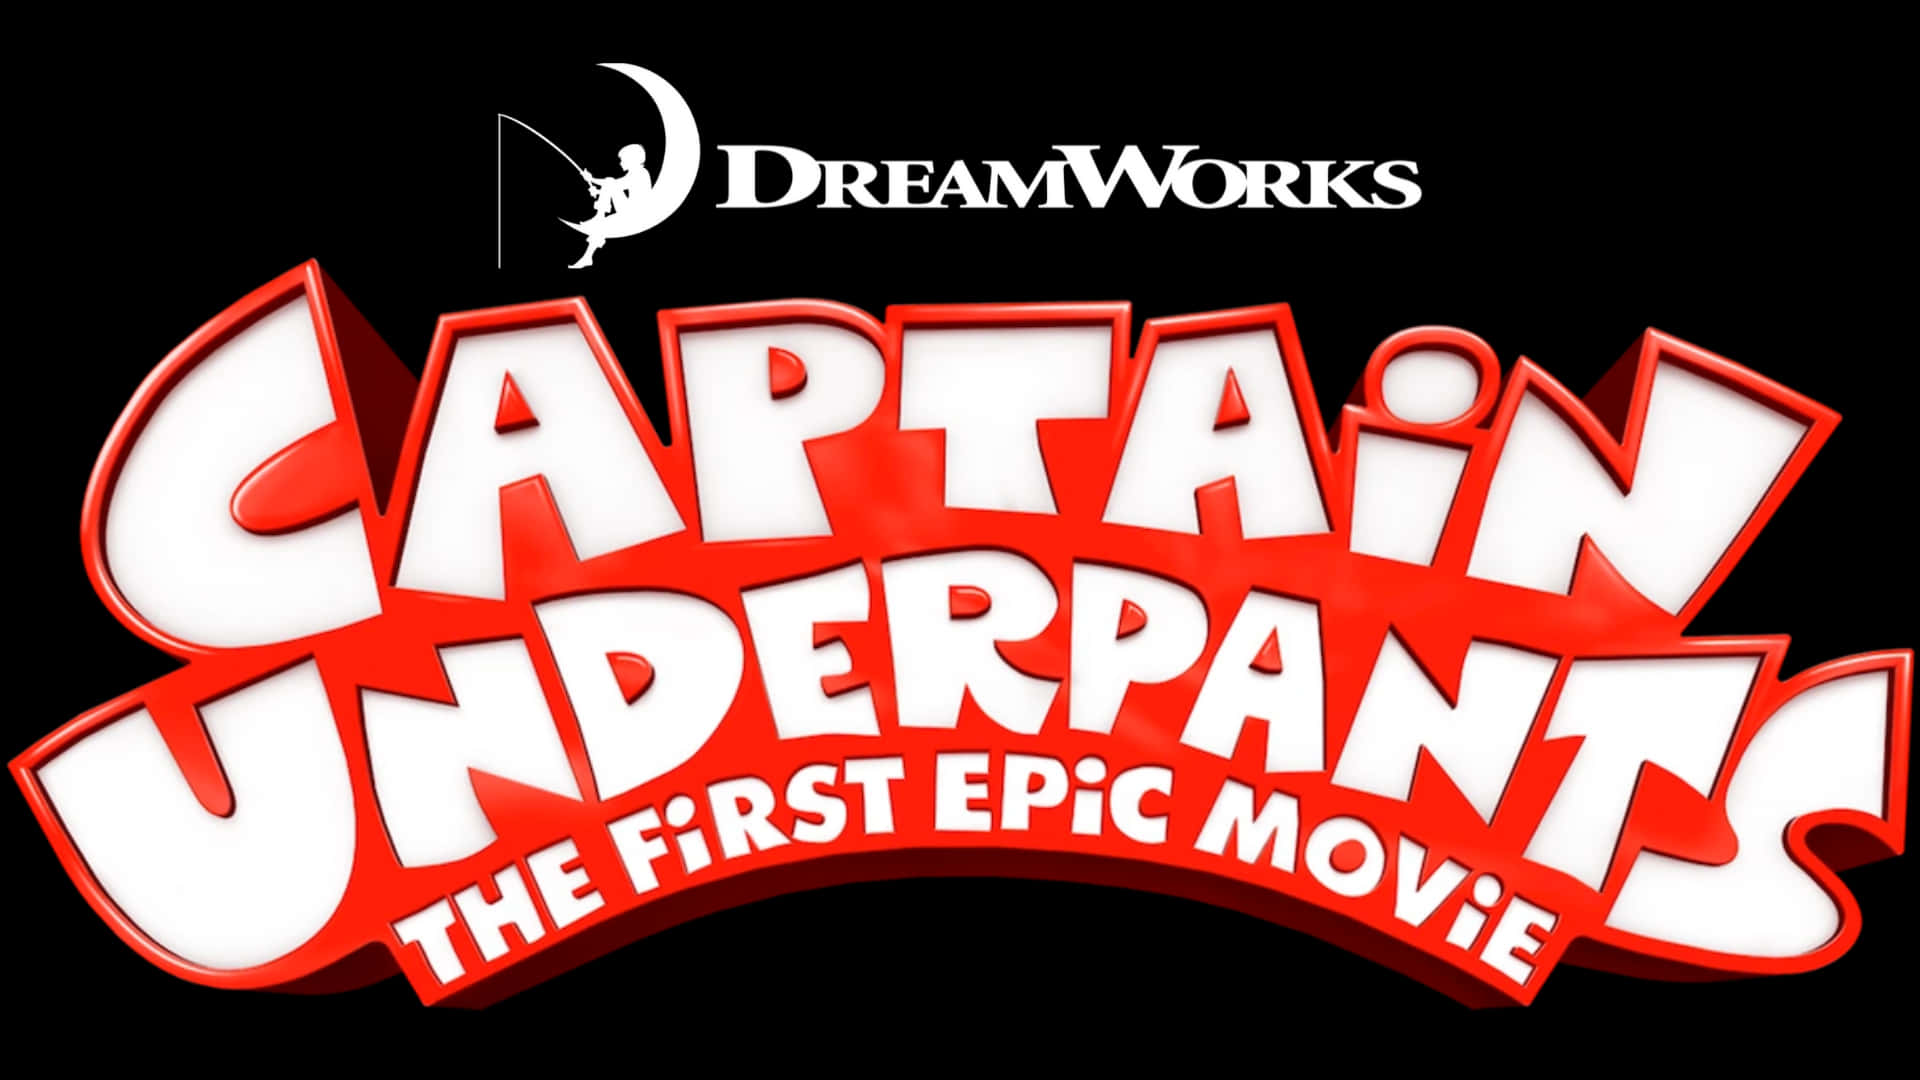 The iconic logo from Captain Underpants: The First Epic Movie against a minimalist white backdrop. Wallpaper